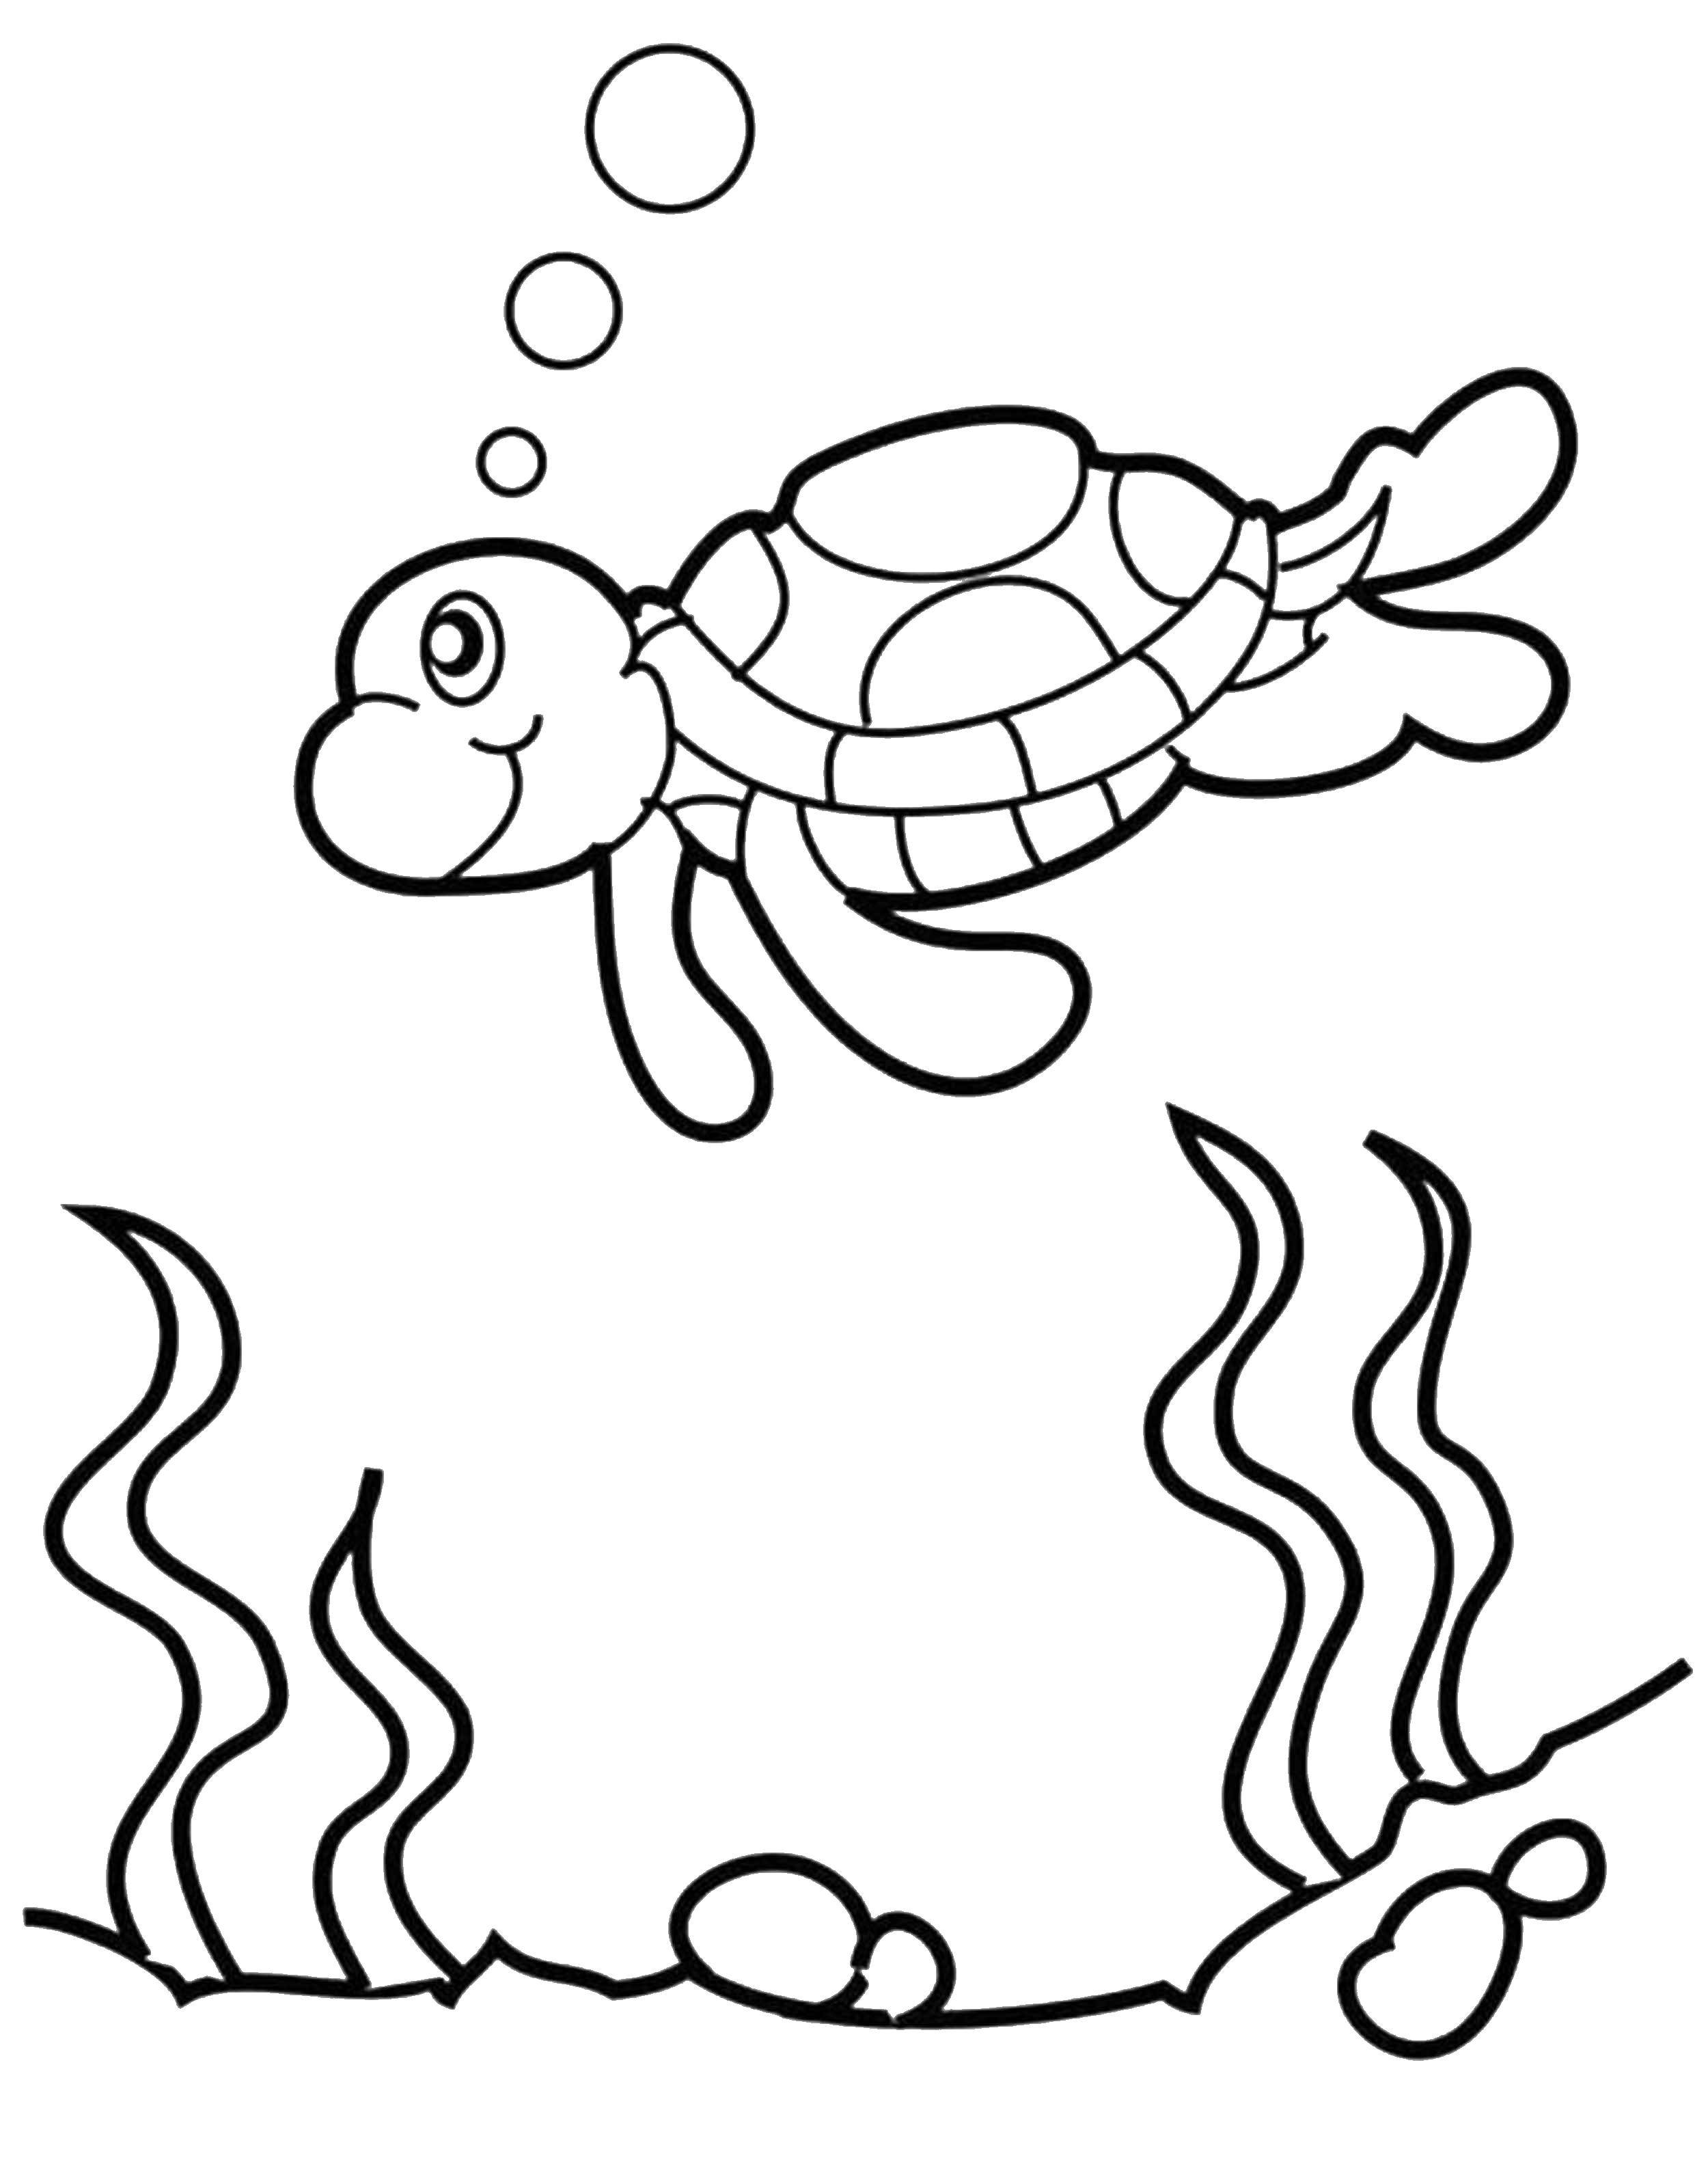 Coloring Sea turtle let the bubbles. Category animals cubs . Tags:  Reptile, turtle.